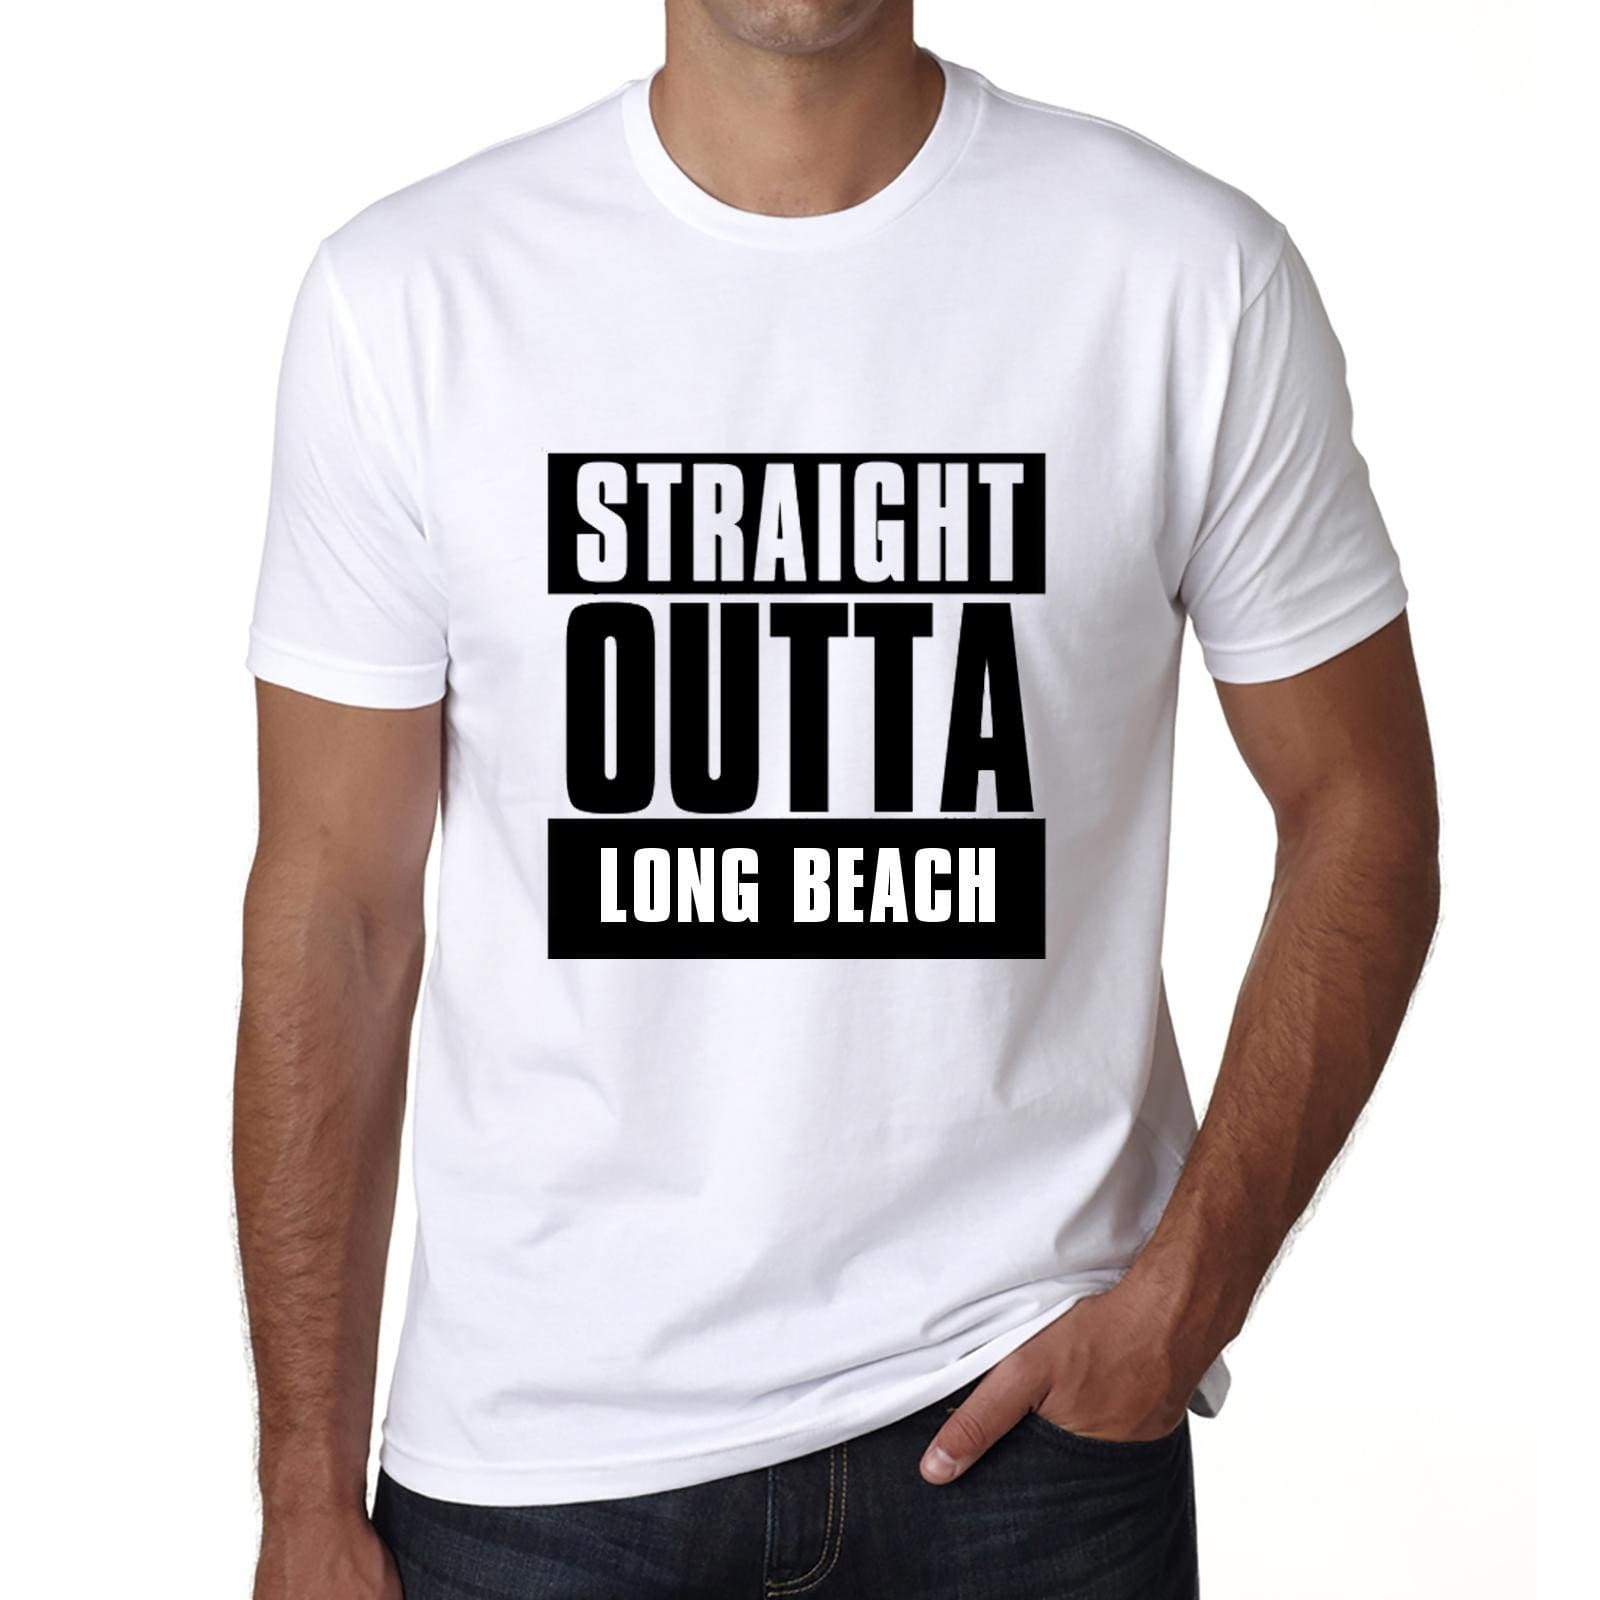 Straight Outta Long Beach Mens Short Sleeve Round Neck T-Shirt 00027 - White / S - Casual